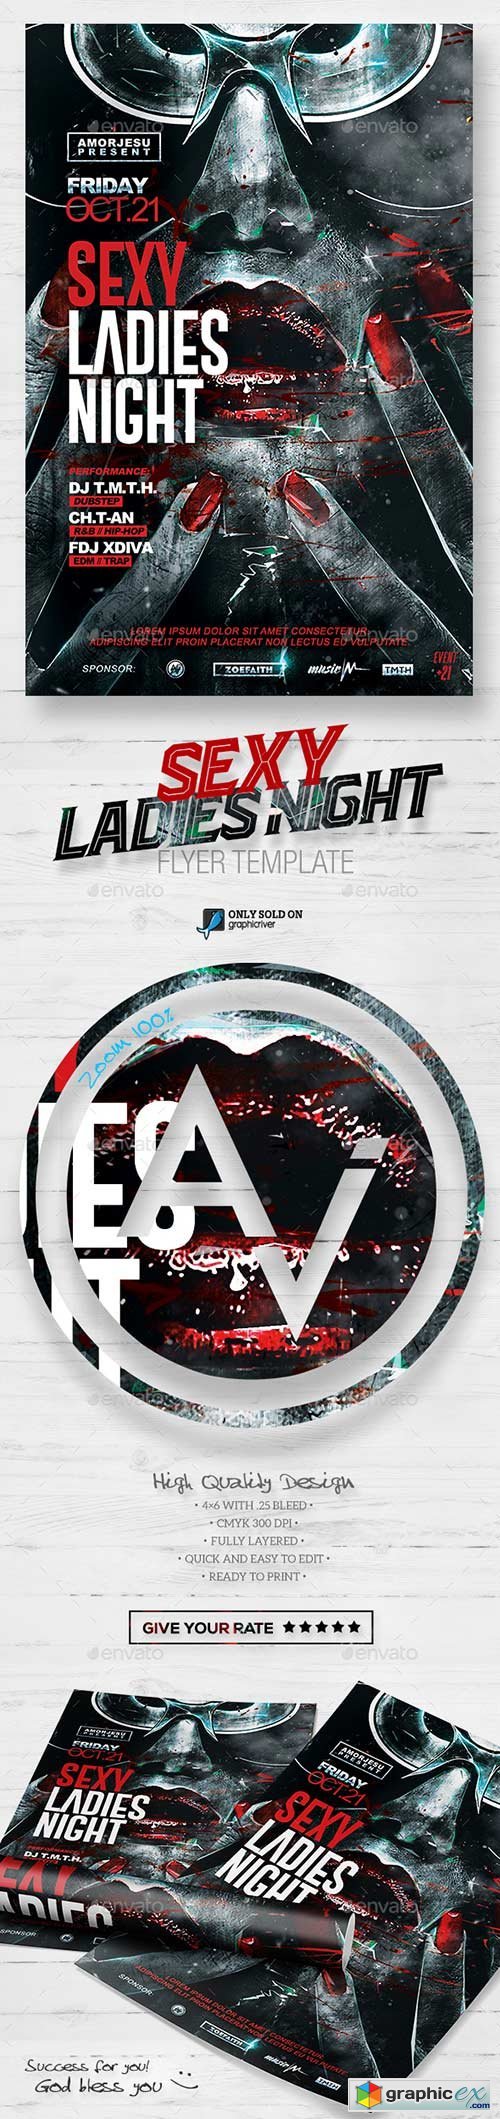 Sexy Ladies Night Flyer Template